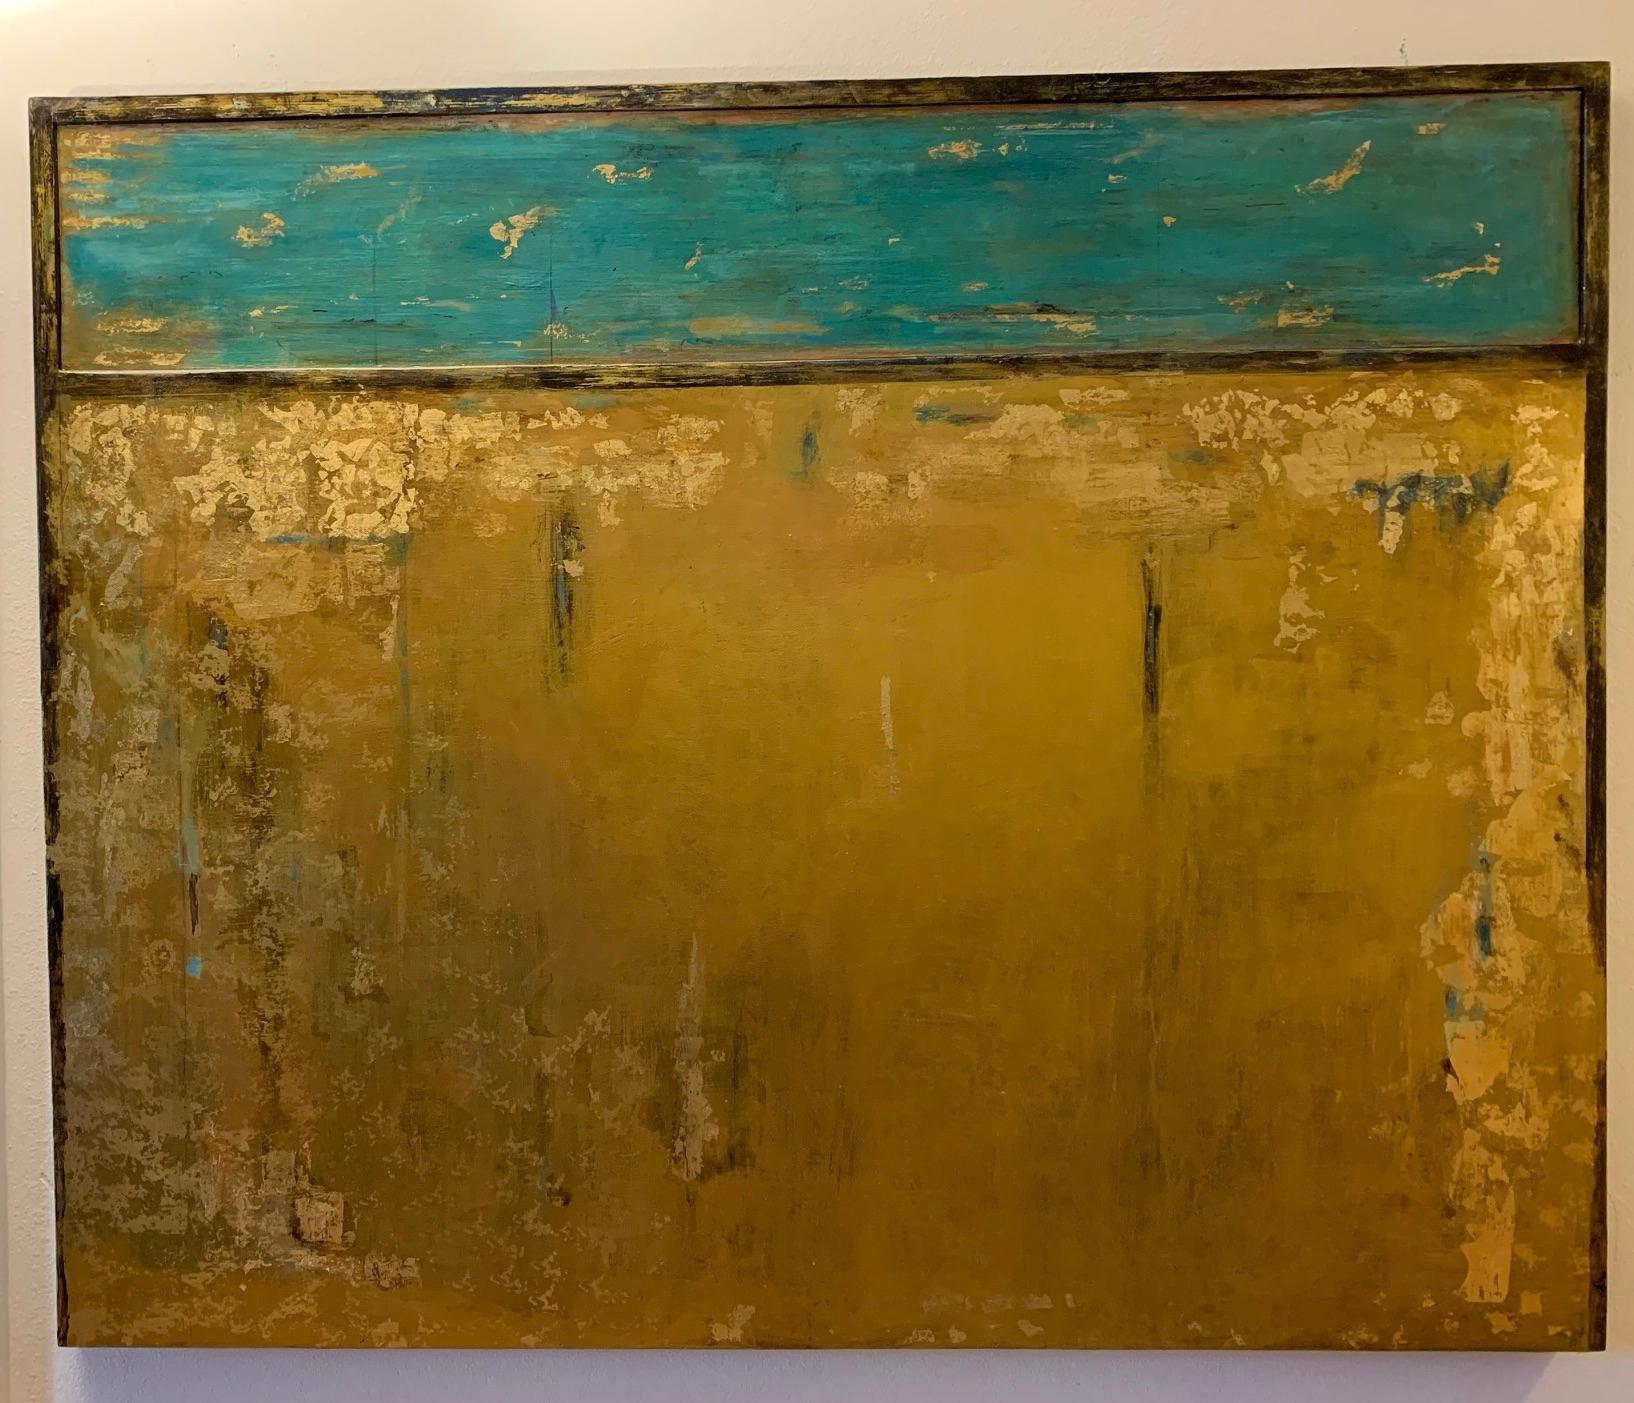 Timeless View, 2021
Acrylic, gold, lacquer on wood panel, turquoise panel has slight recess into painting to give a sense of drama.
Erikson’s central imagery concerns itself with intrigue and a sense of surprise. His body of work is often dispersed